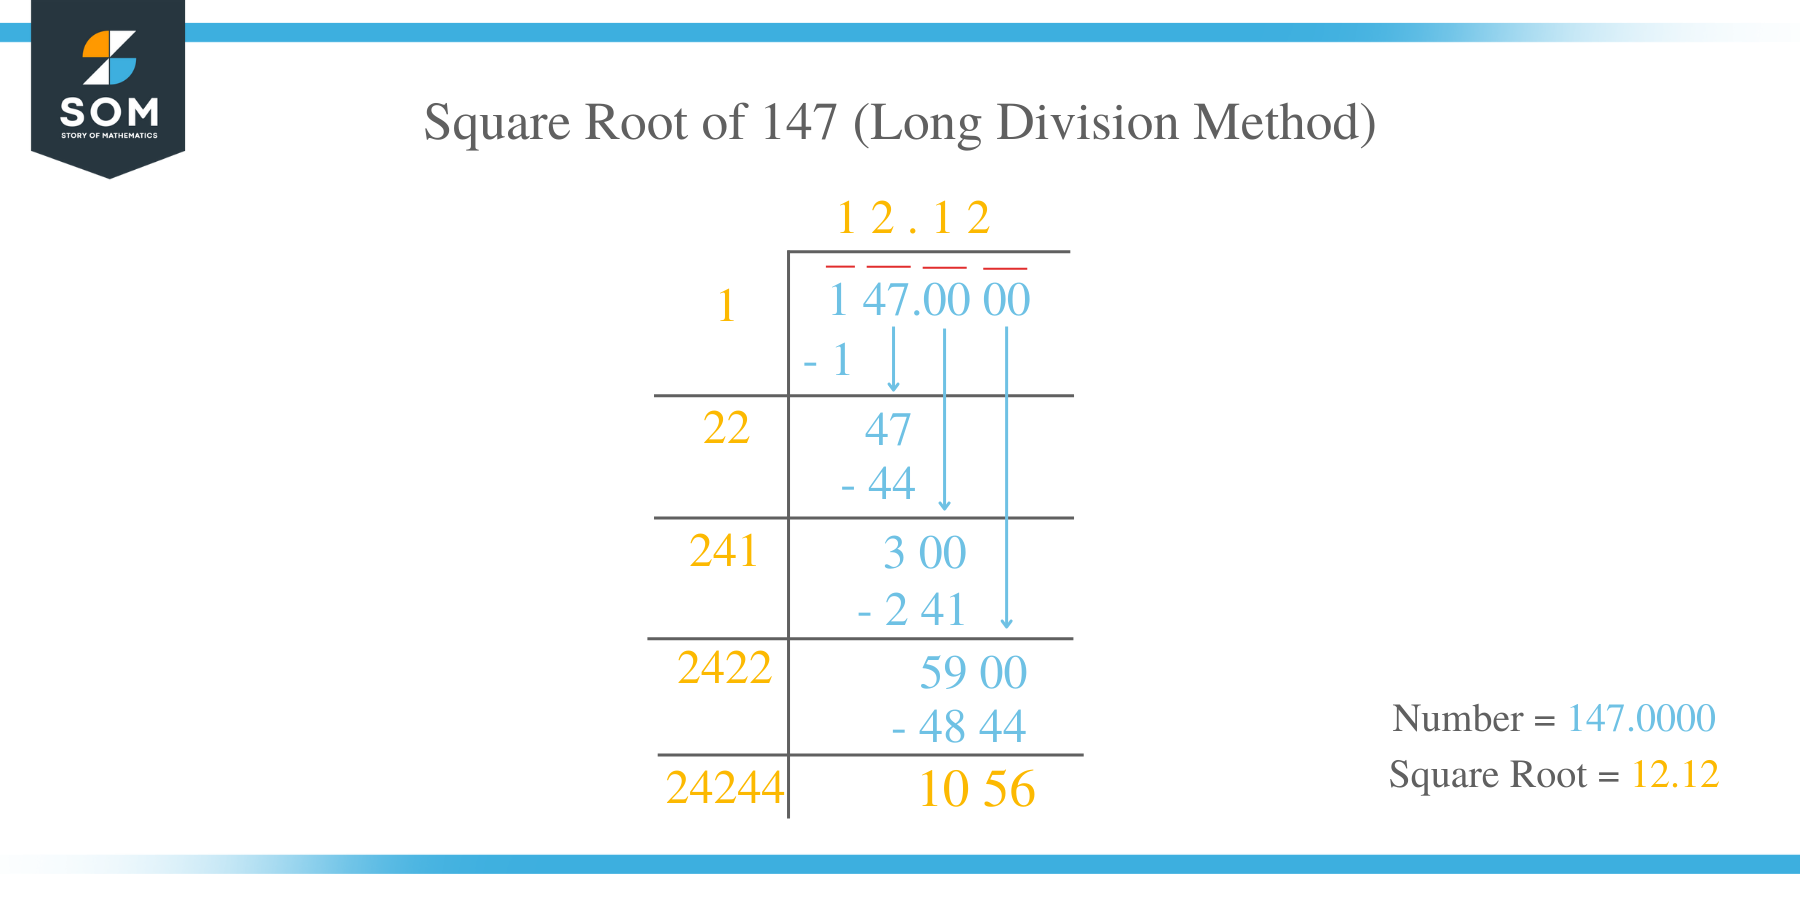 Square Root of 147 by Long Division Method